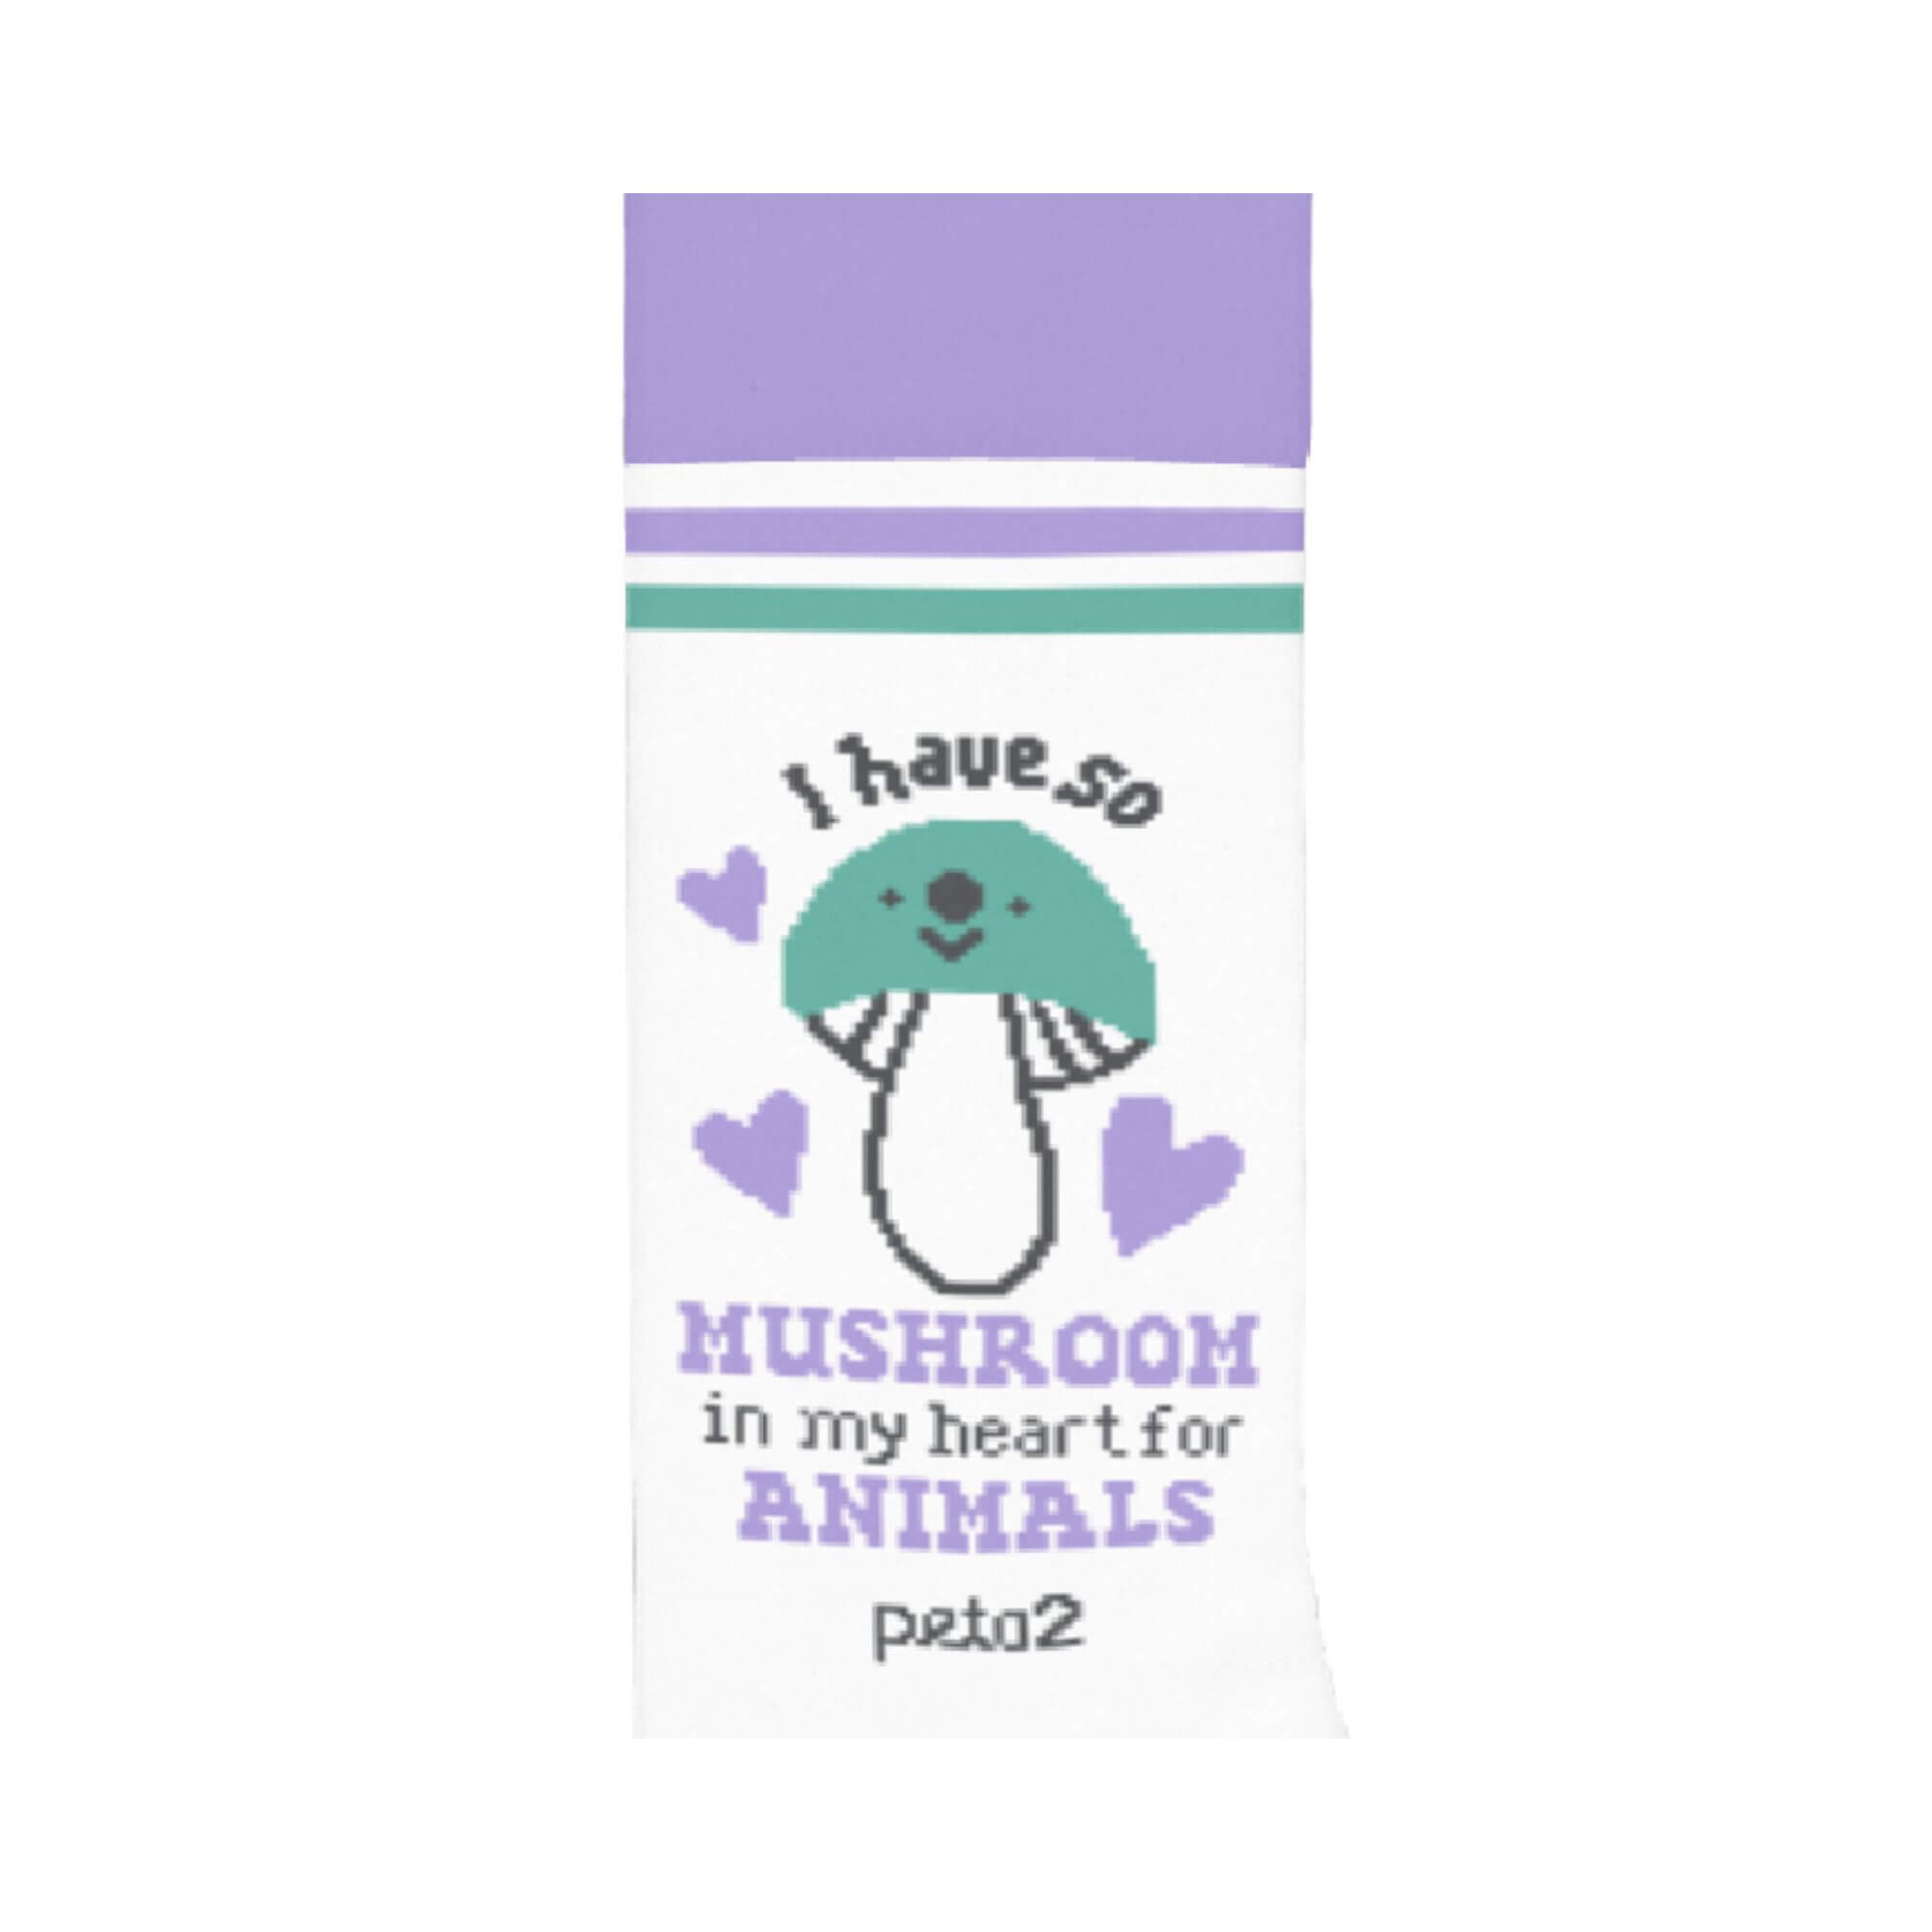 A pair of white socks featuring stripes, a mushroom illustration, and text reading "I have so mushroom in my heart for animals"